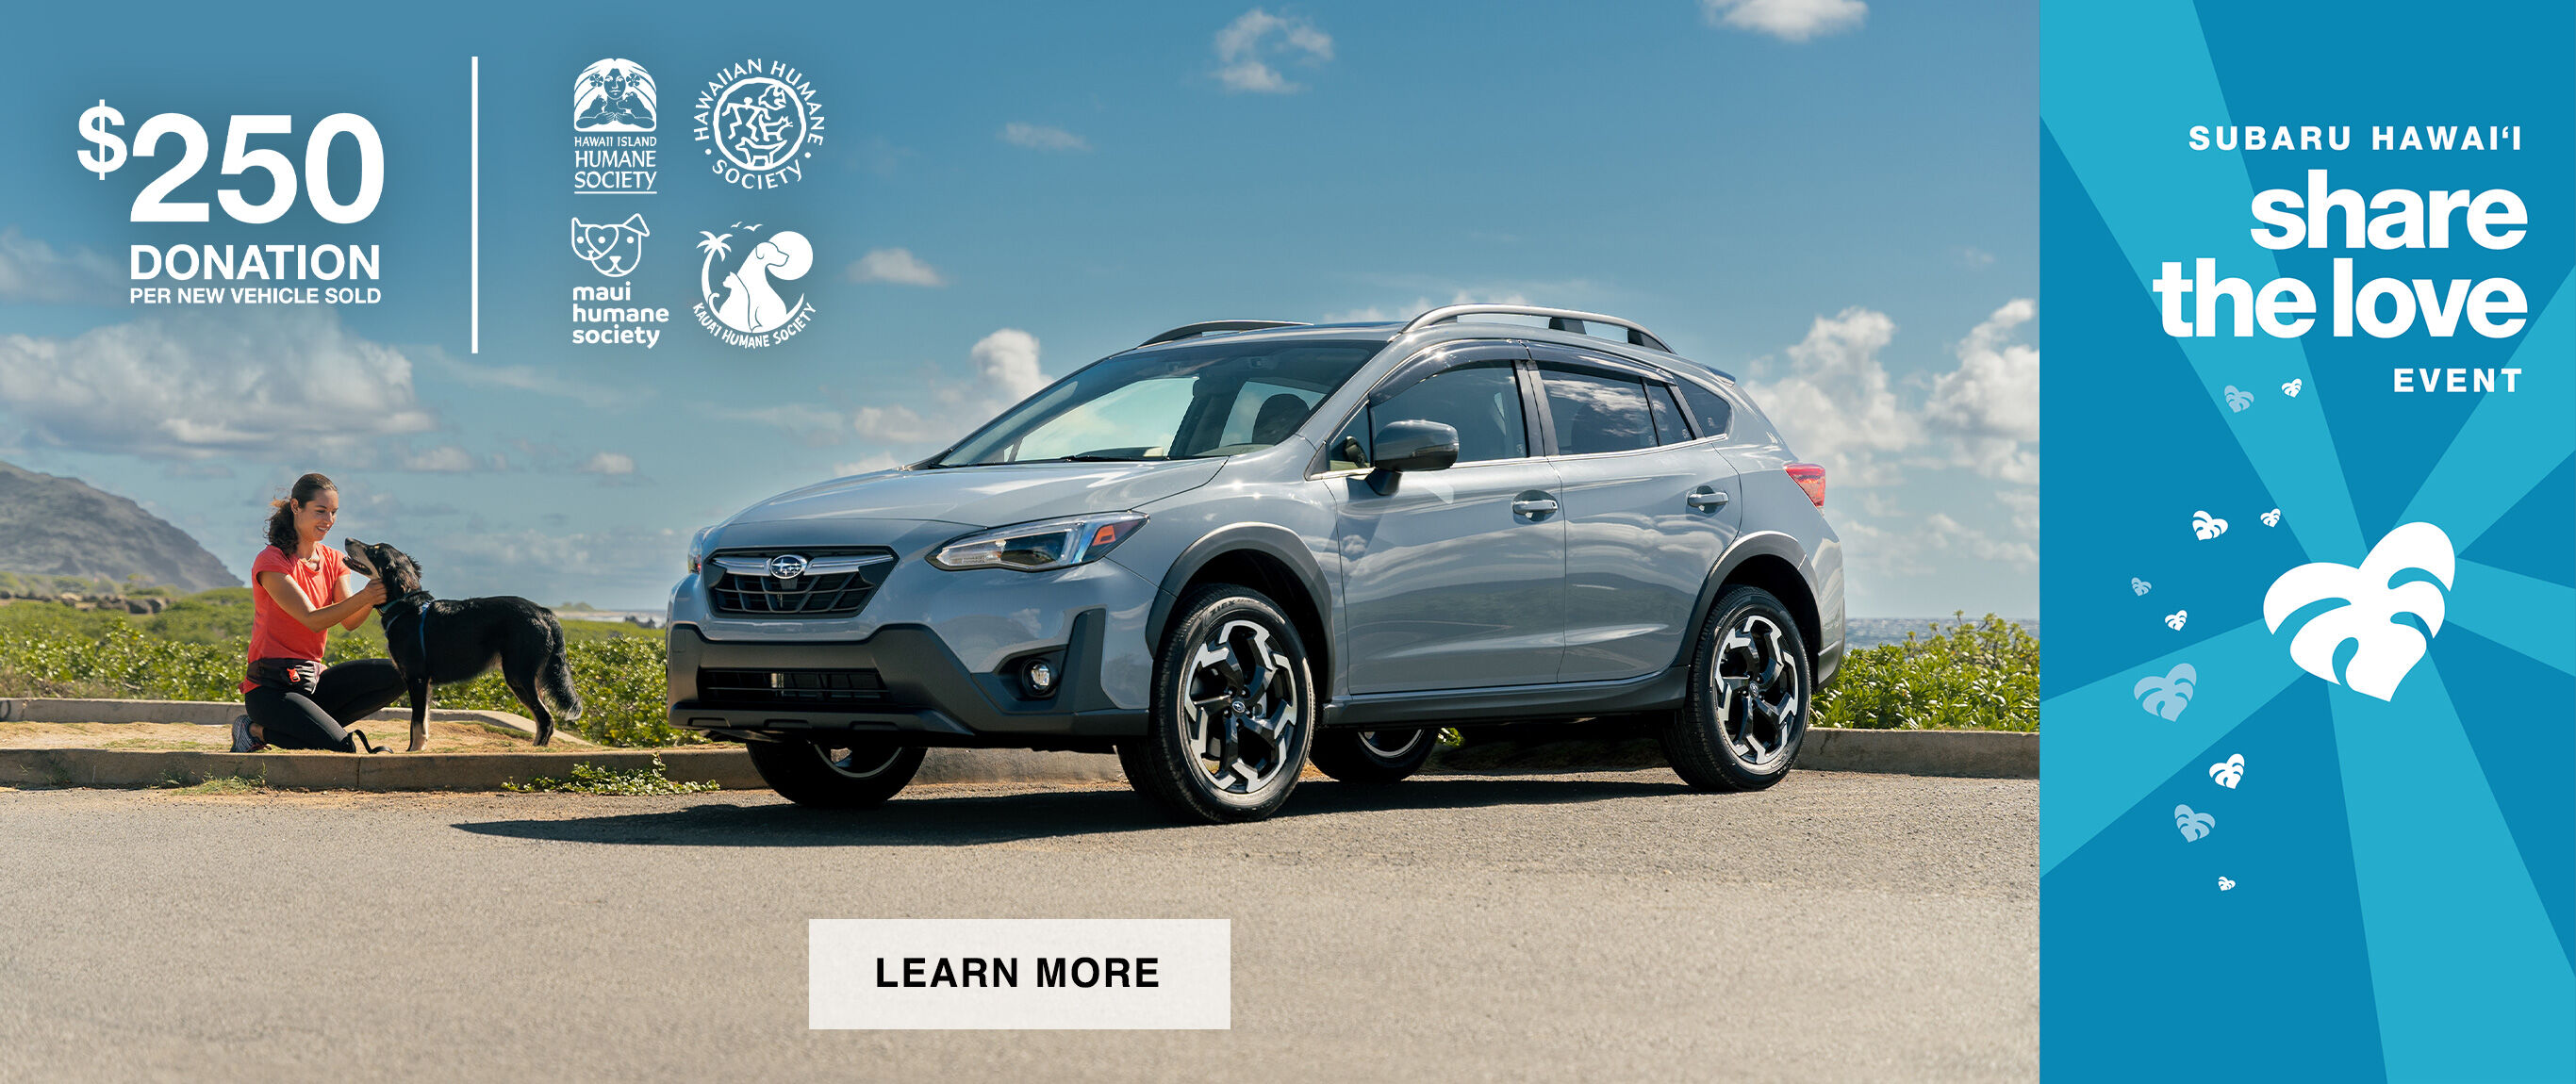 The 2023 Crosstrek. Share the Love Event - $250 donation per new vehicle sold.